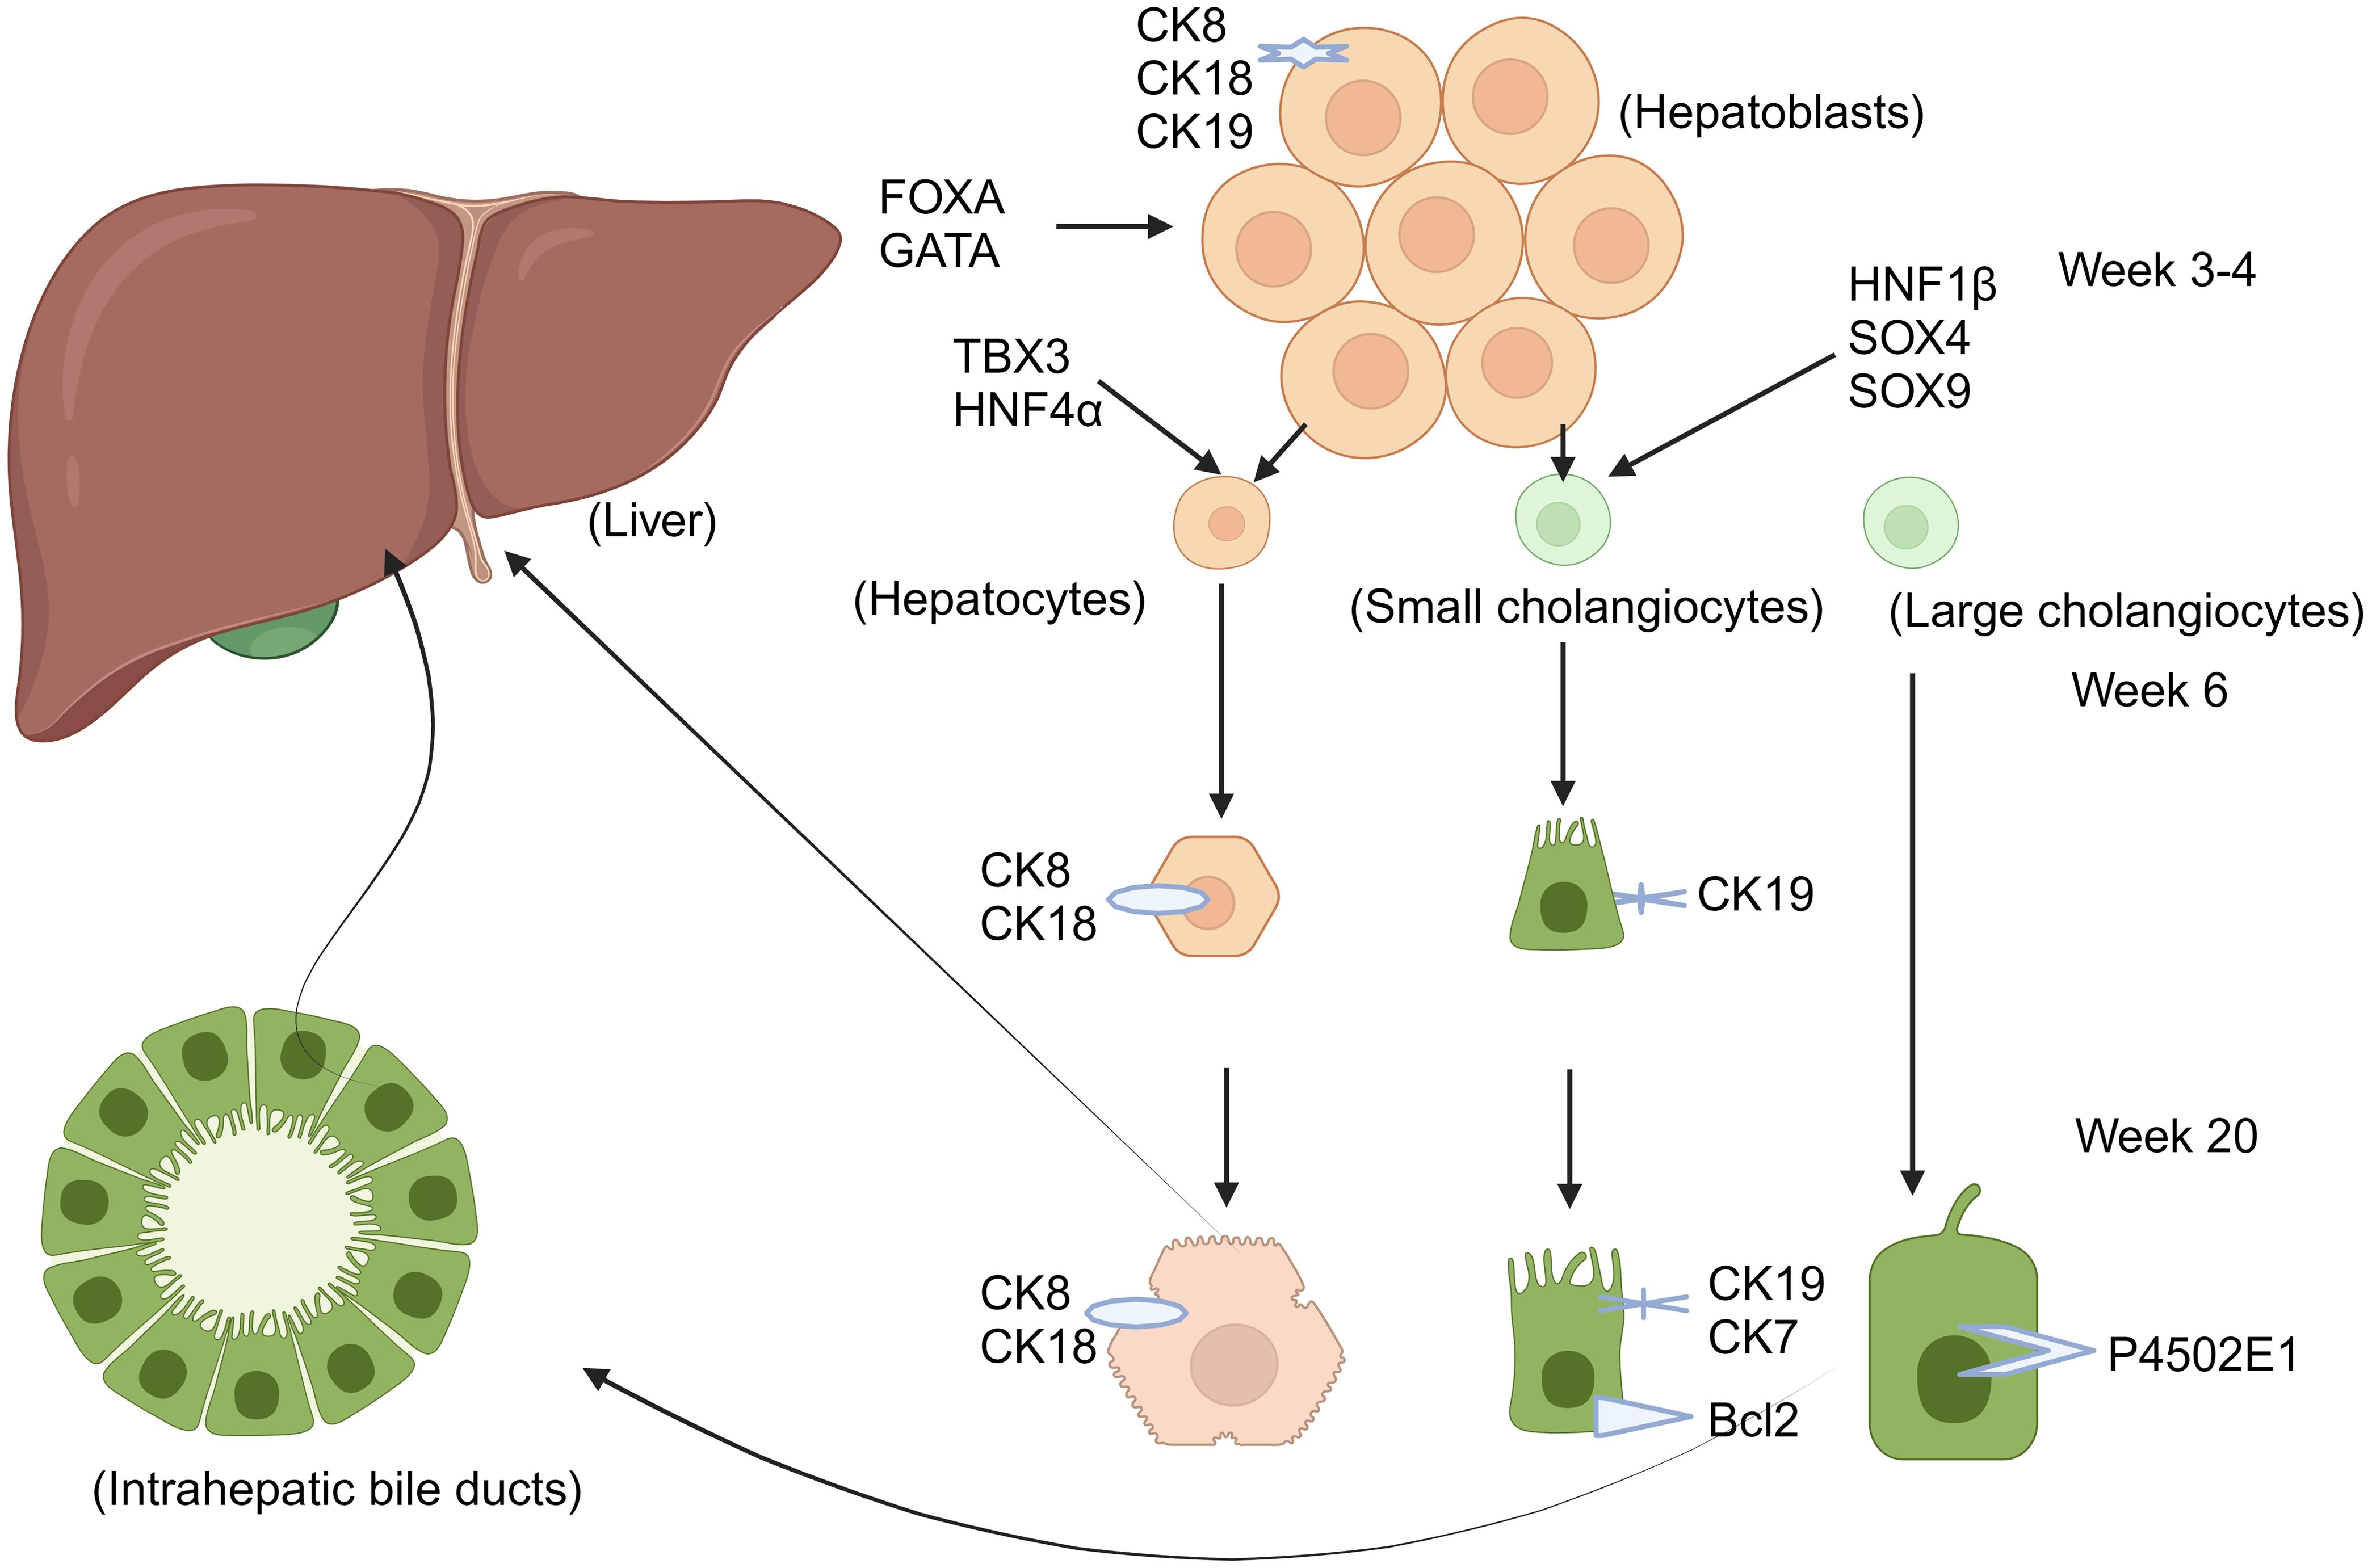 Hepatoblasts begin to differentiate under the action of FOXA and GATA.